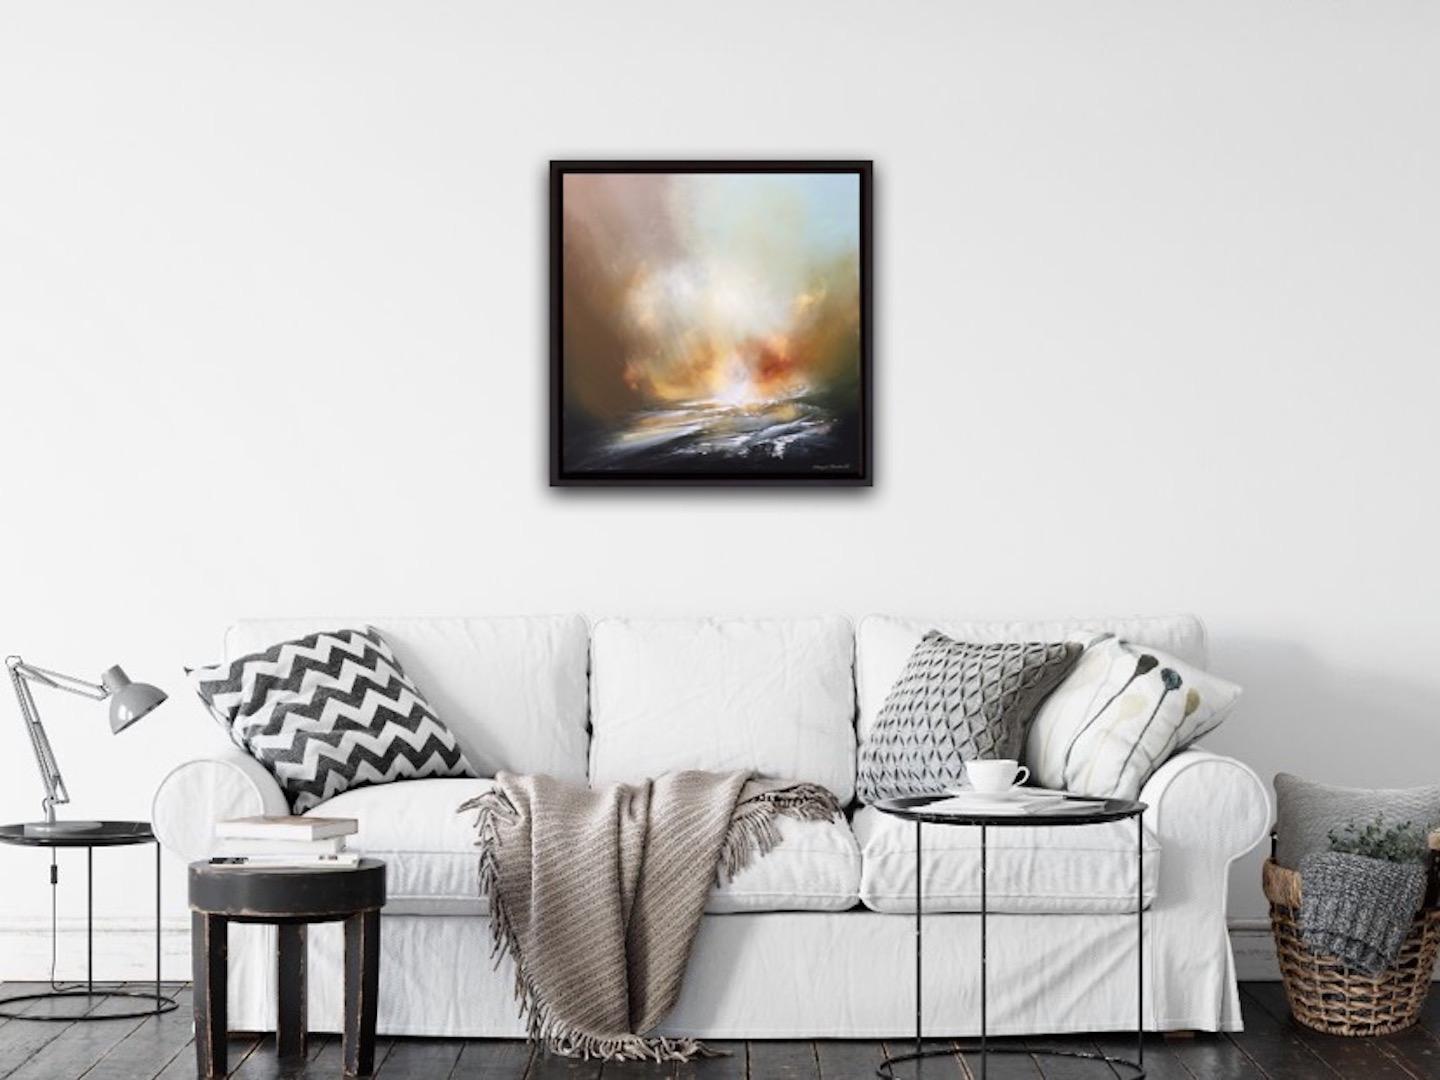 Sheryl Roberts
Clear Outburst
Original Seascape Painting
Oil and Acrylic Paint on Canvas
Framed Size: H 73m x W 73cm
Sold Framed in a Black Floating Frame
(Please note that in situ images are purely an indication of how a piece may look).

A